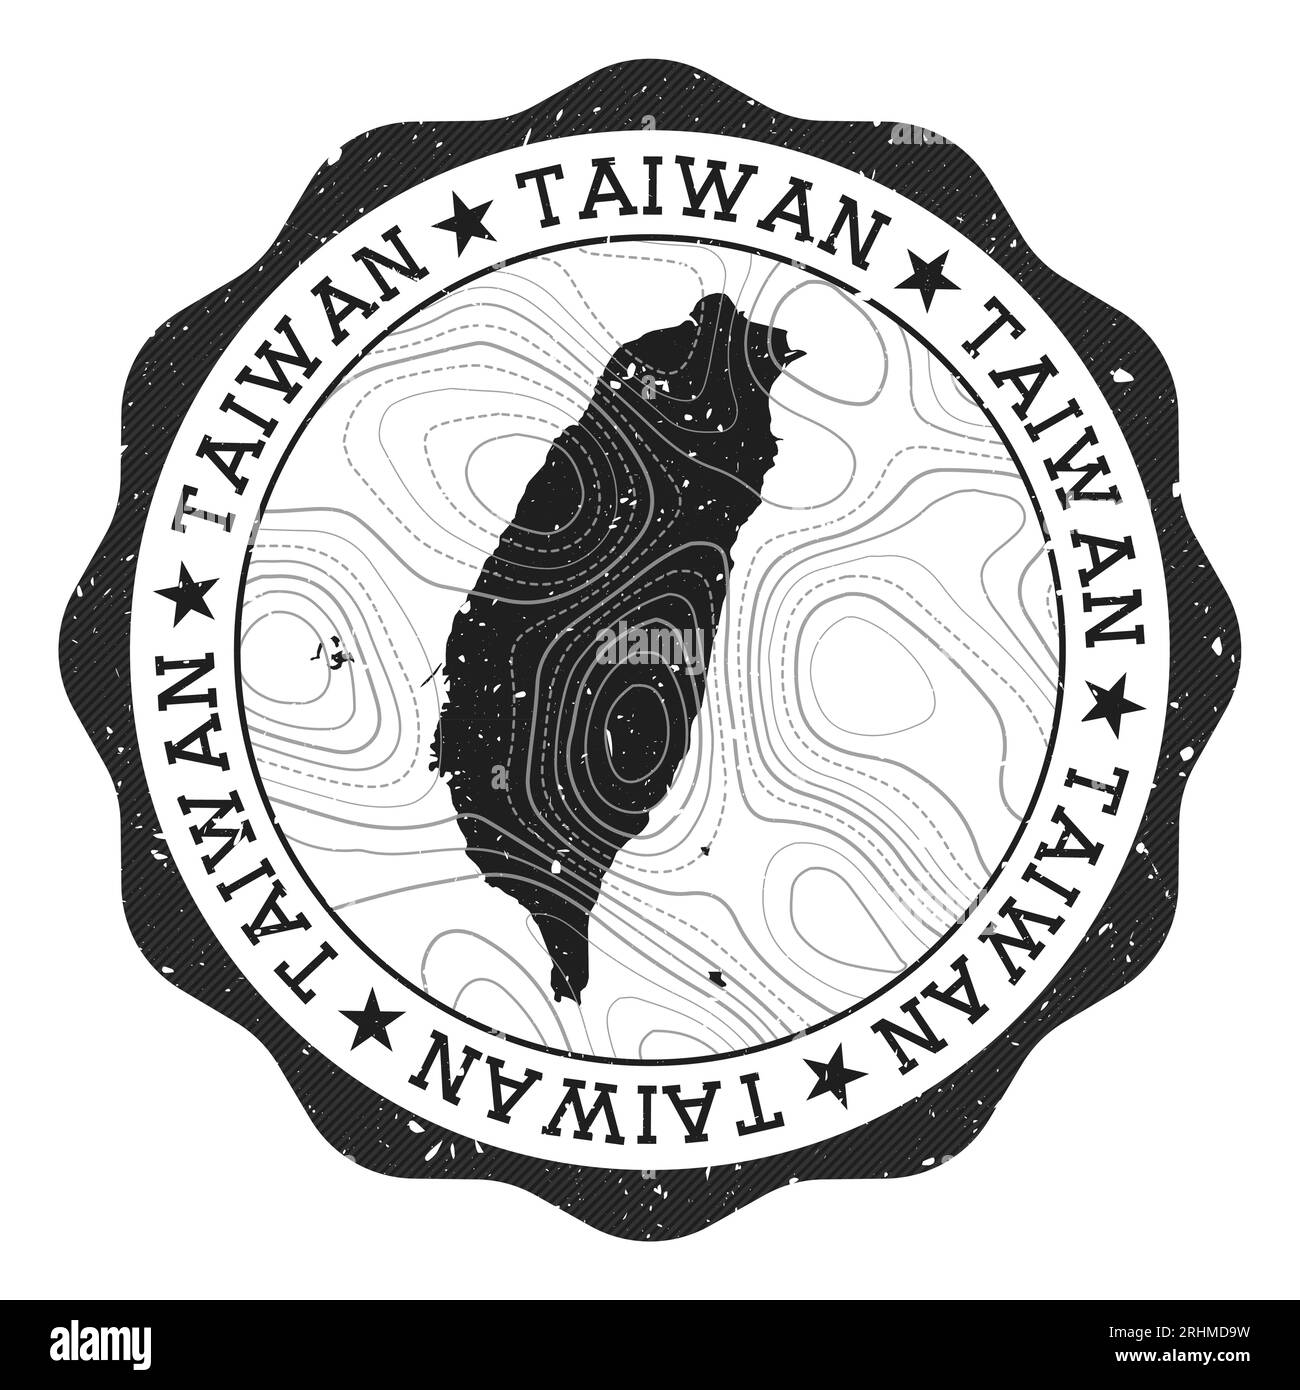 Taiwan outdoor stamp. Round sticker with map of country with topographic isolines. Vector illustration. Can be used as insignia, logotype, label, stic Stock Vector